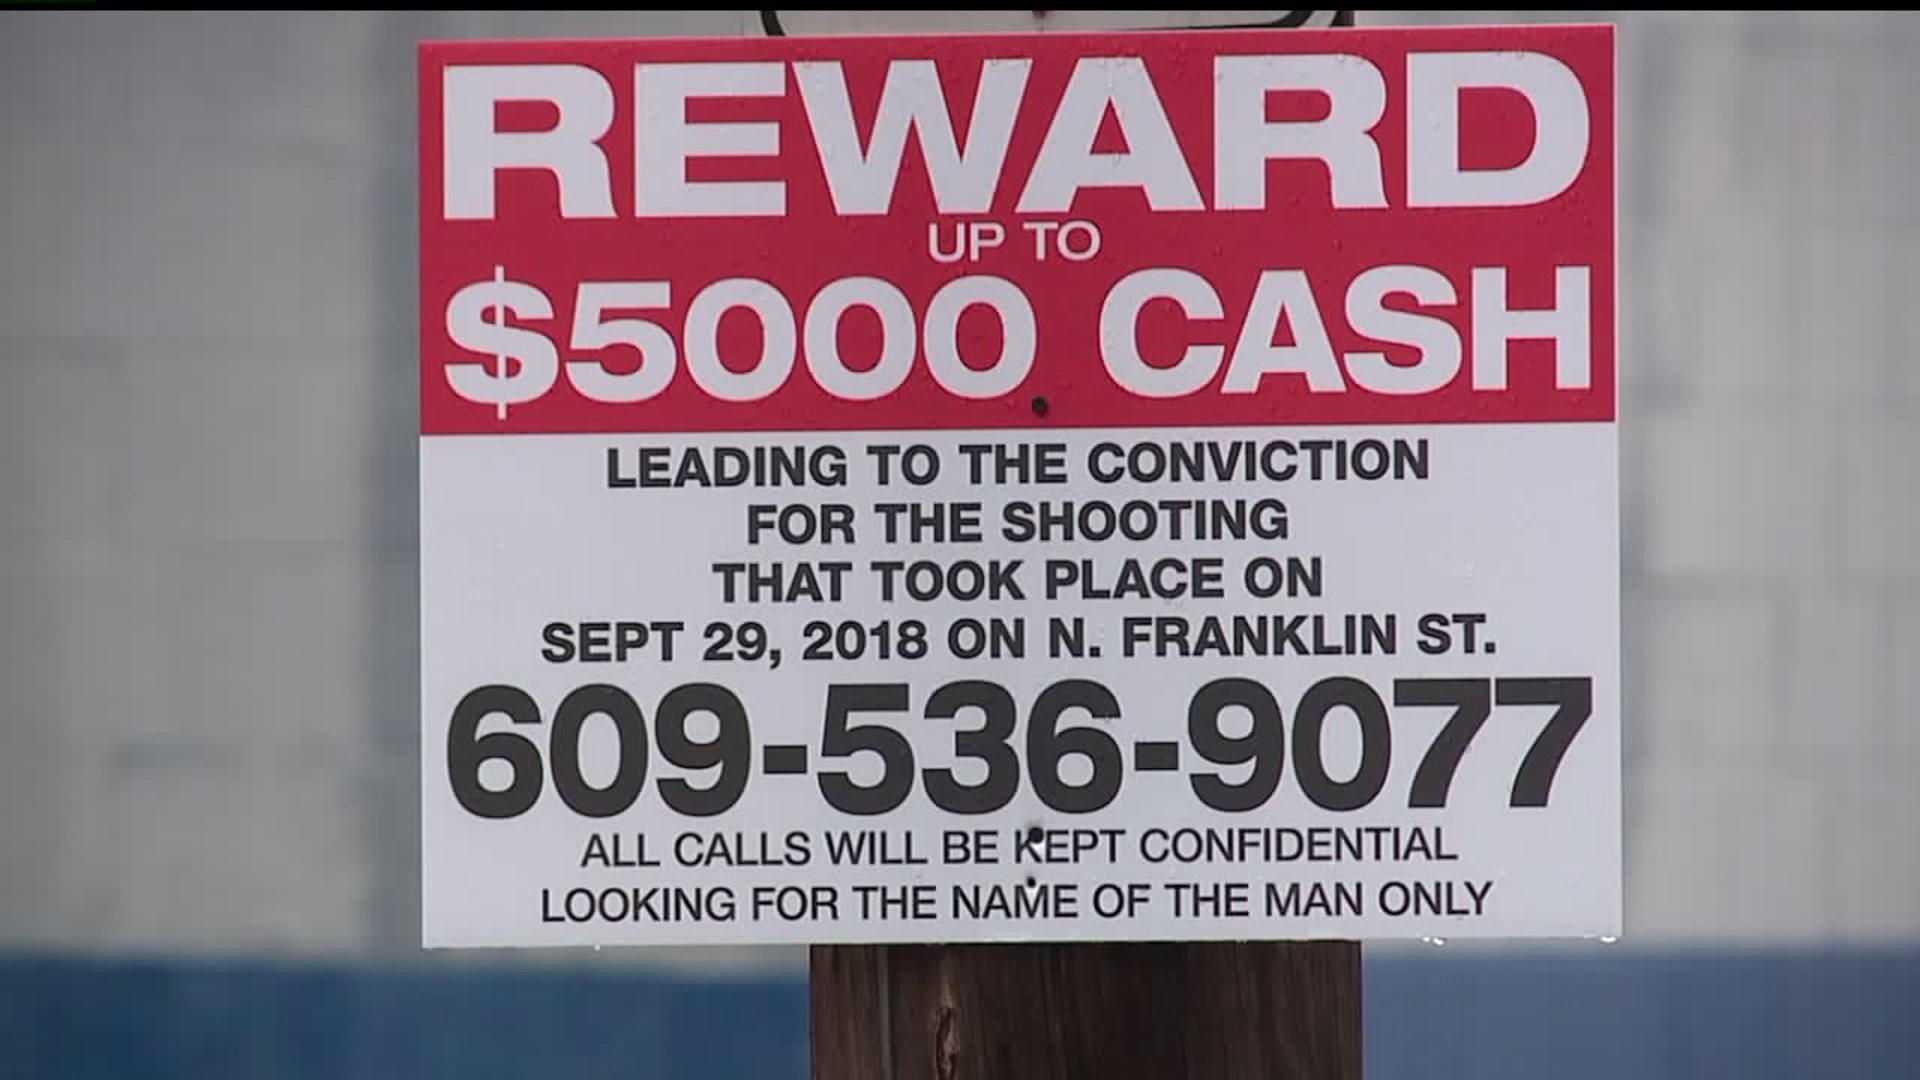 Unintended target of shooting offering $5,000 of his own money to catch person responsible in York